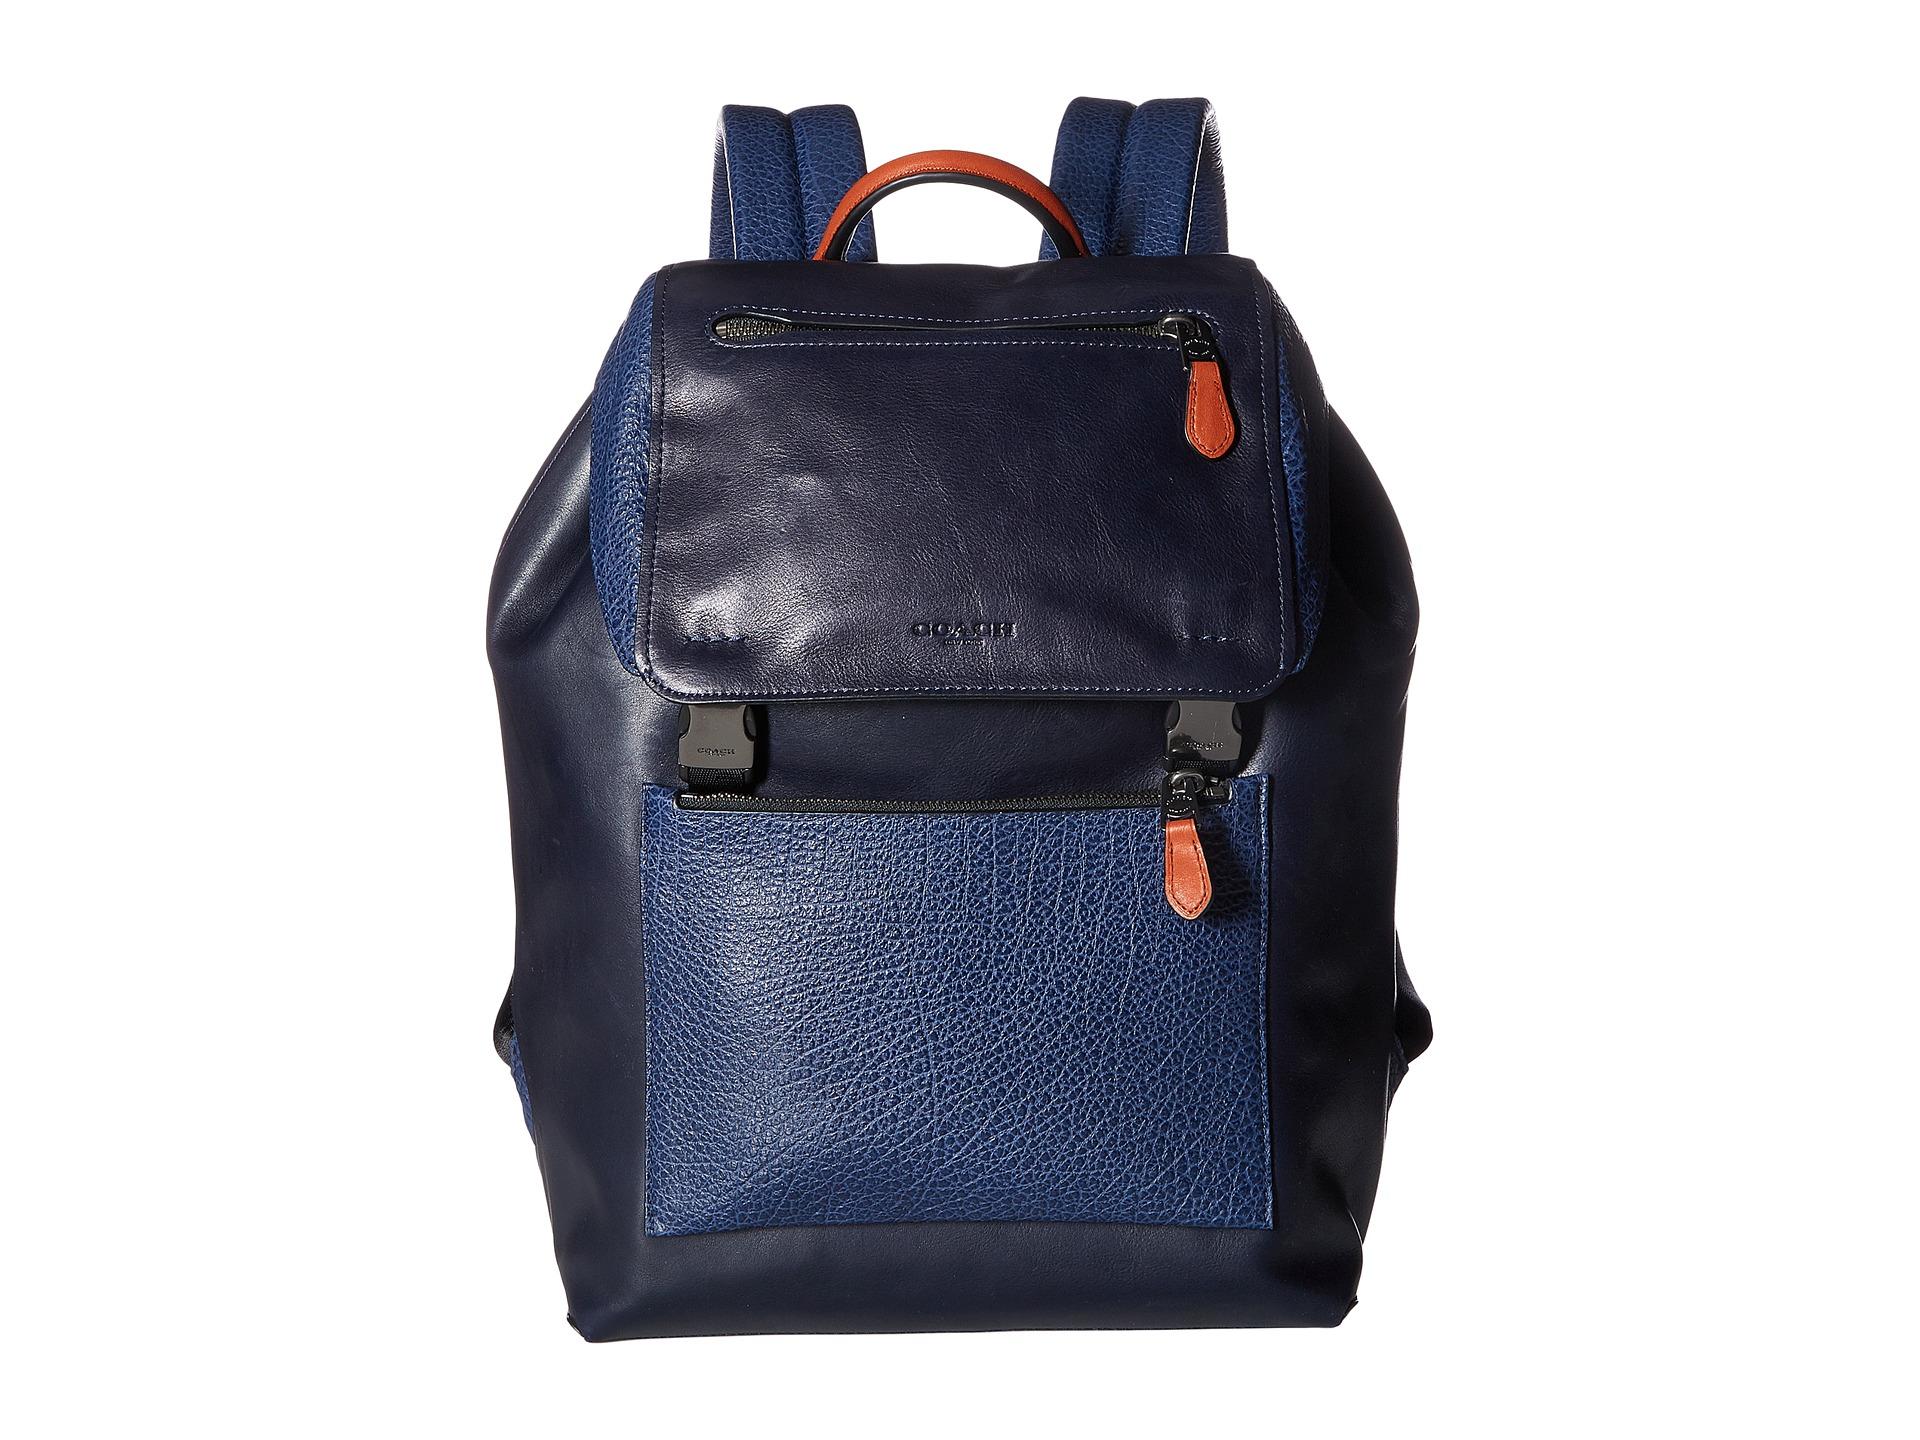 COACH Leather Manhattan Backpack in Blue for Men - Lyst